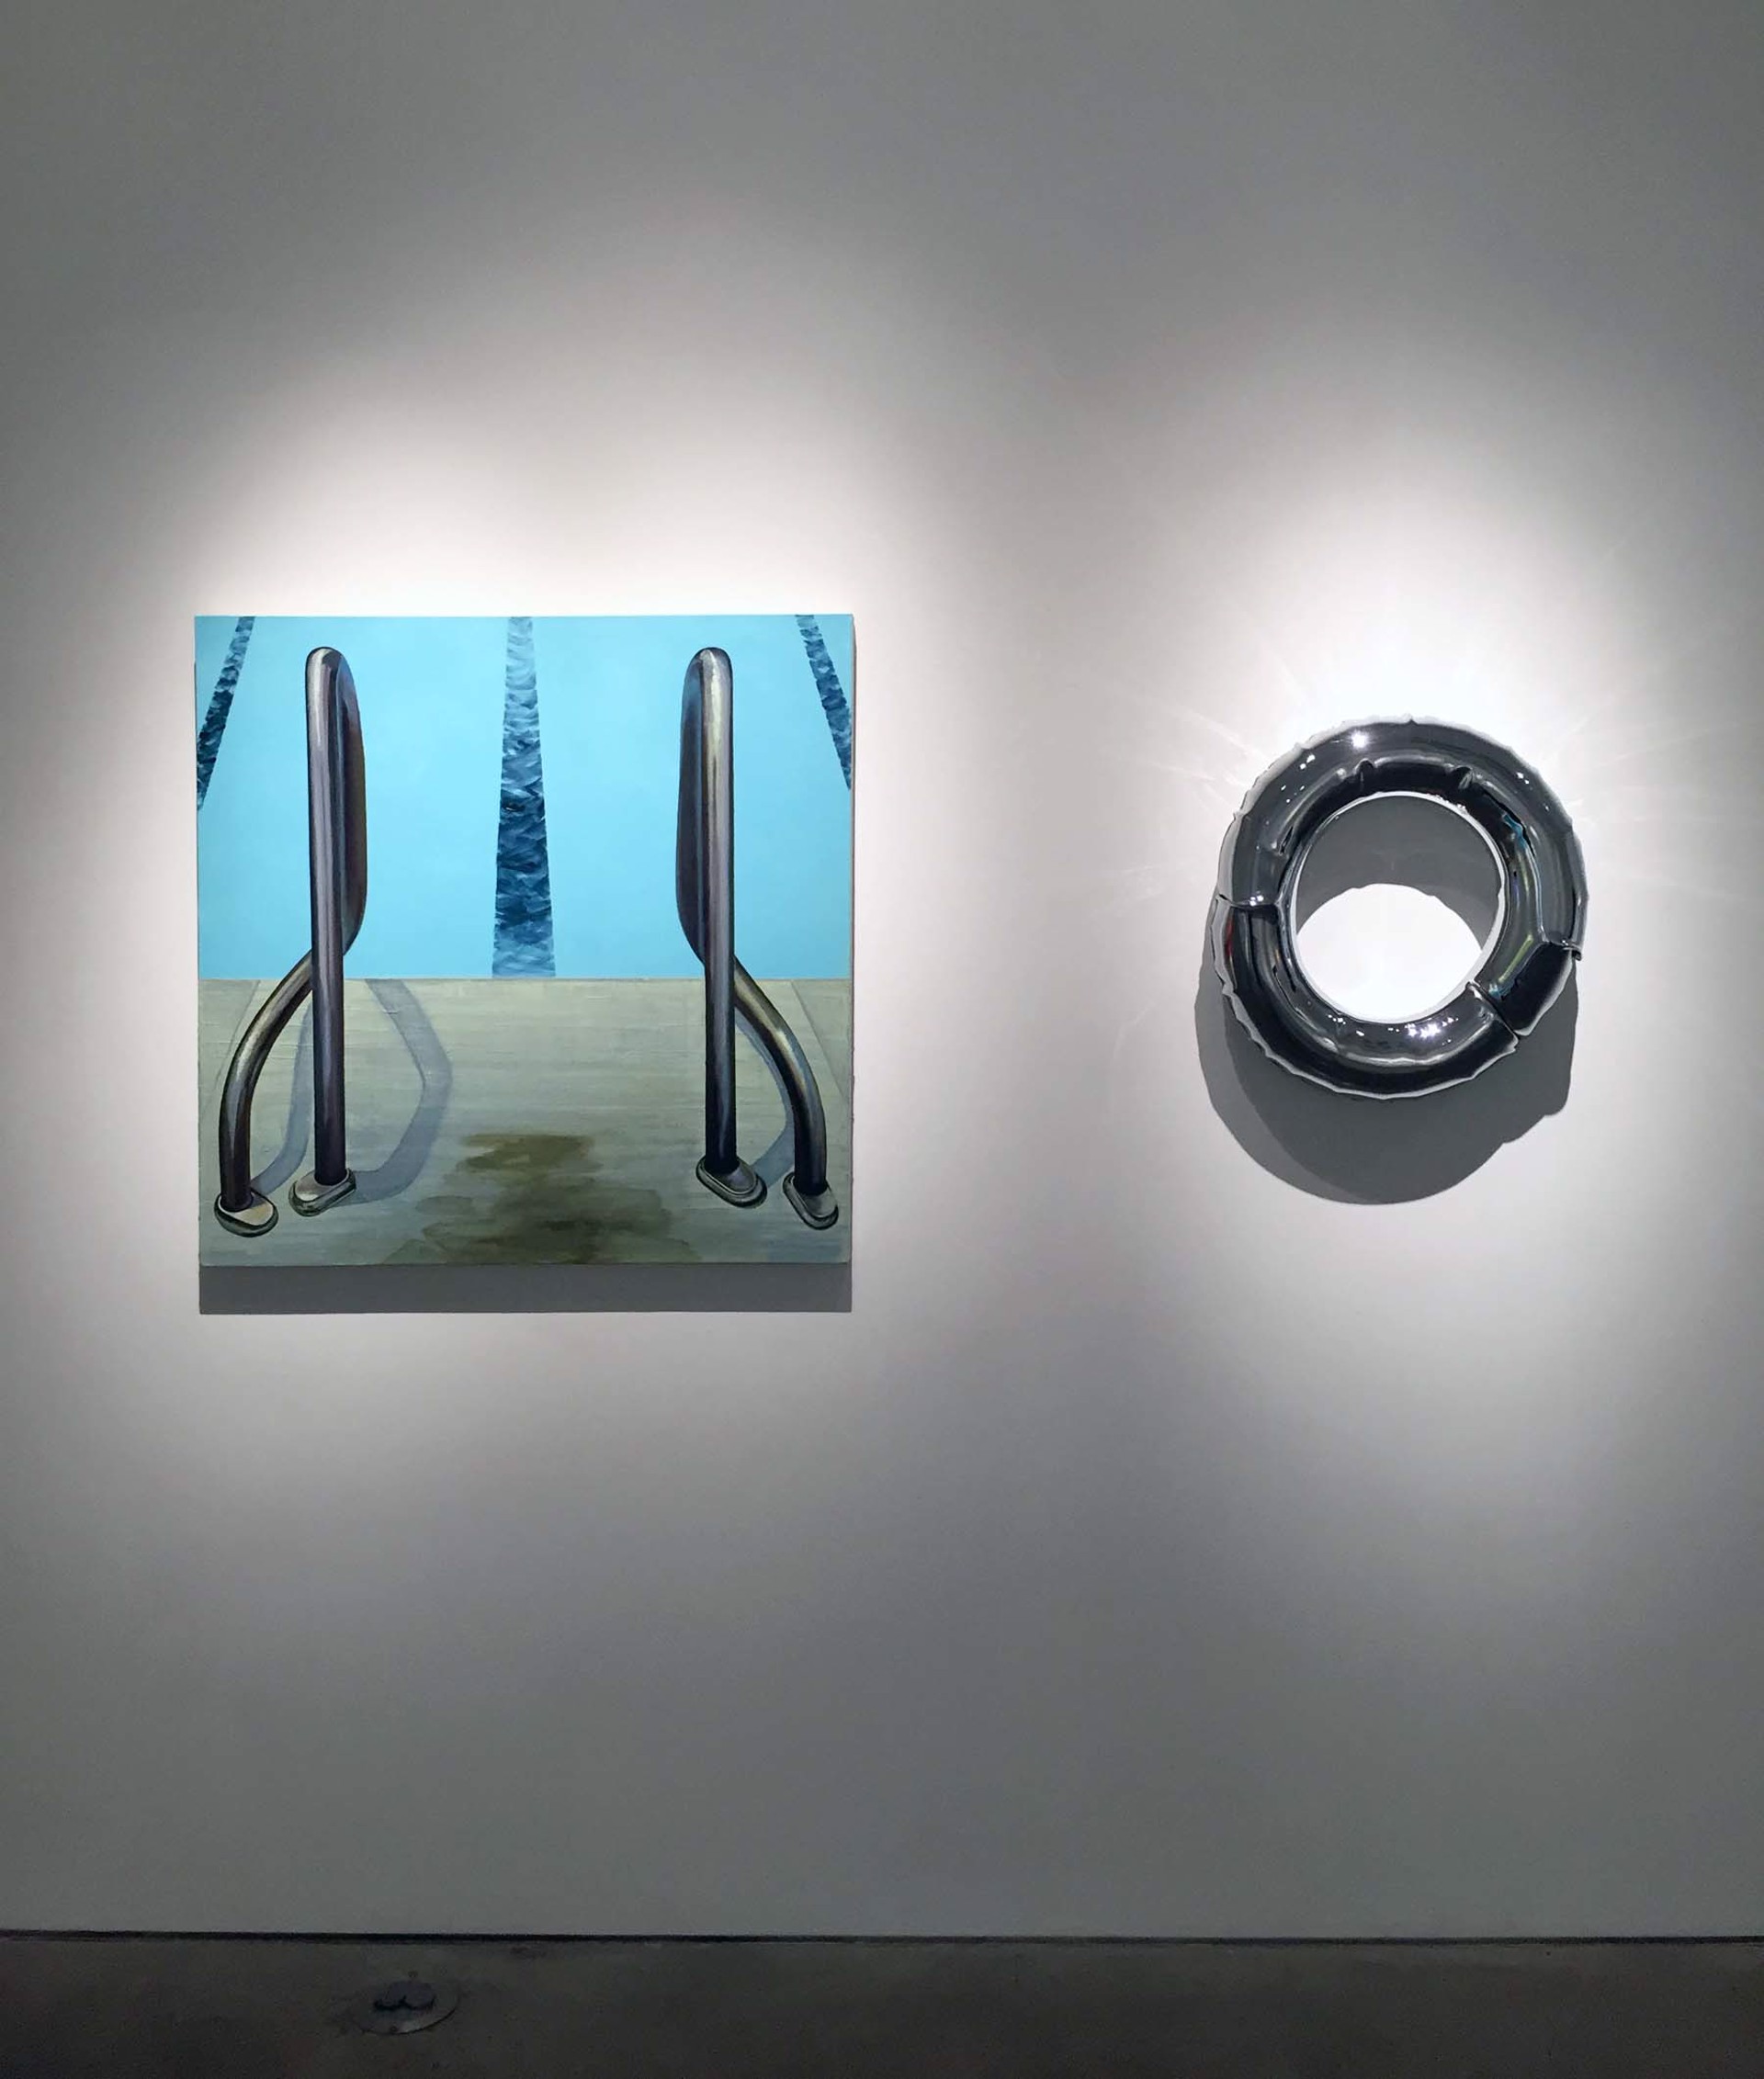 Installation: Lana Waldrep-Appl, "Pool" 2014 (left). William Cannings, "Silver Tube" 2015 (right). 